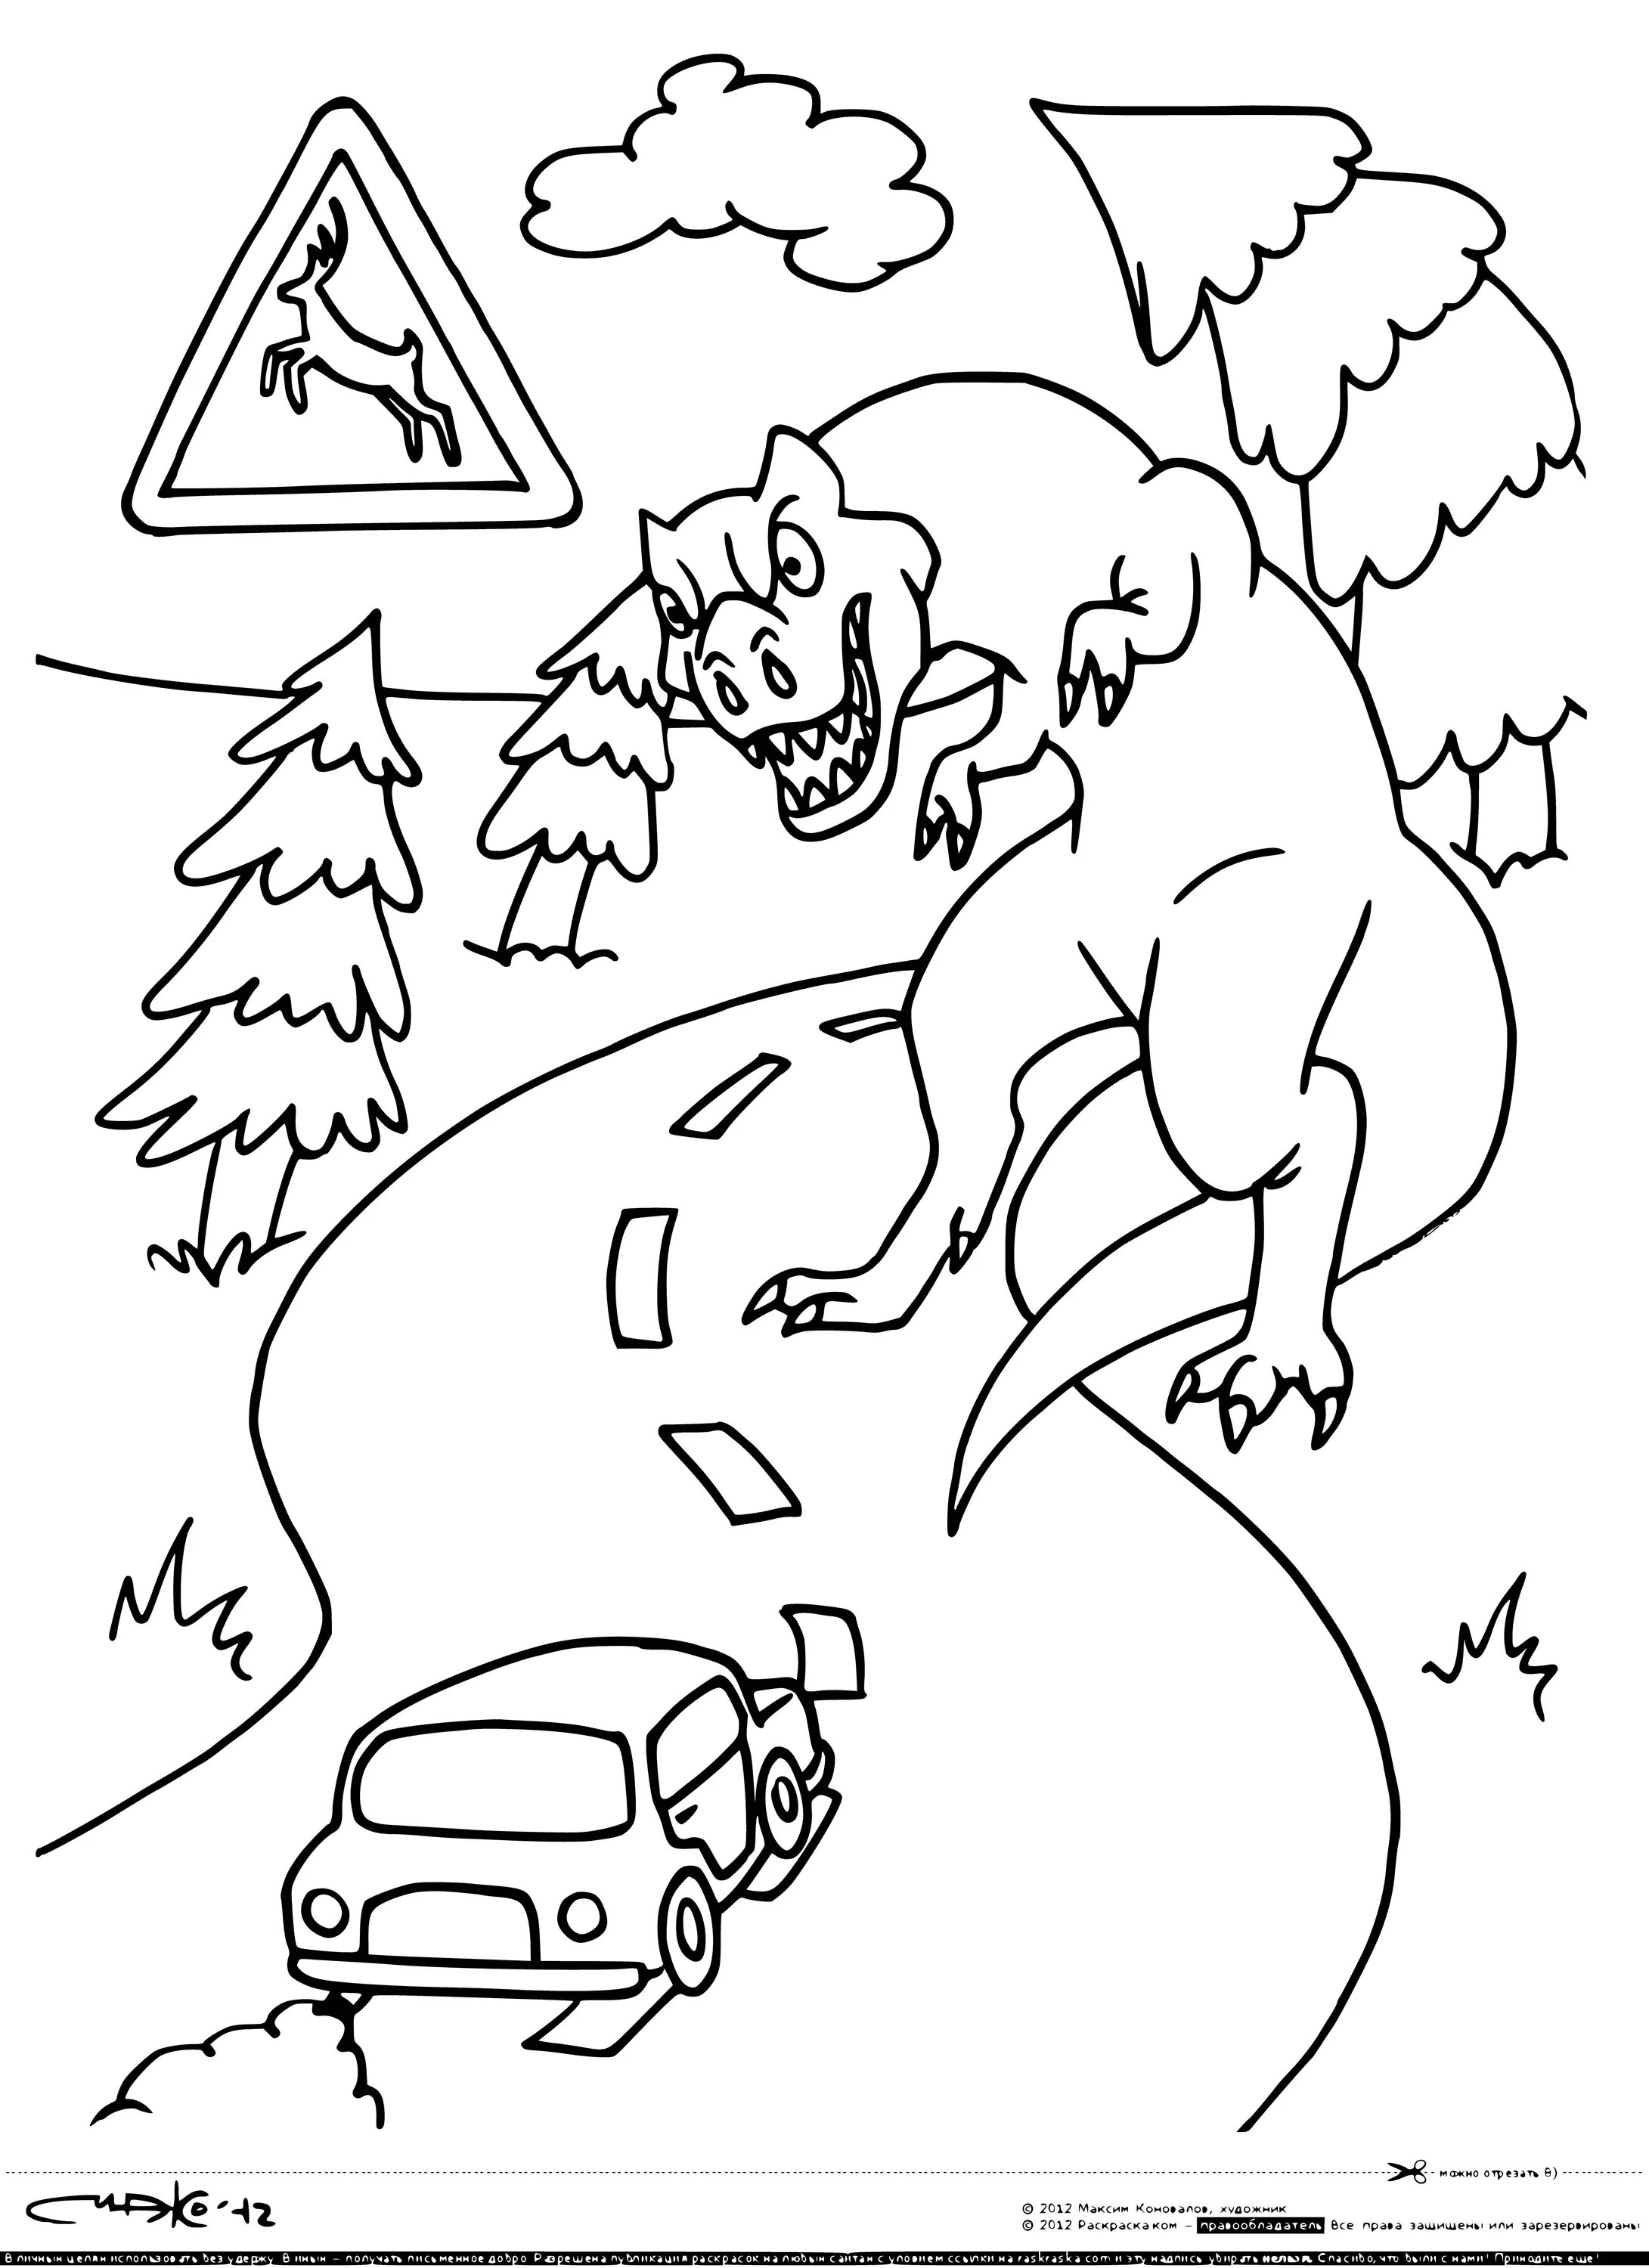 Coloring page nice winter road for kids